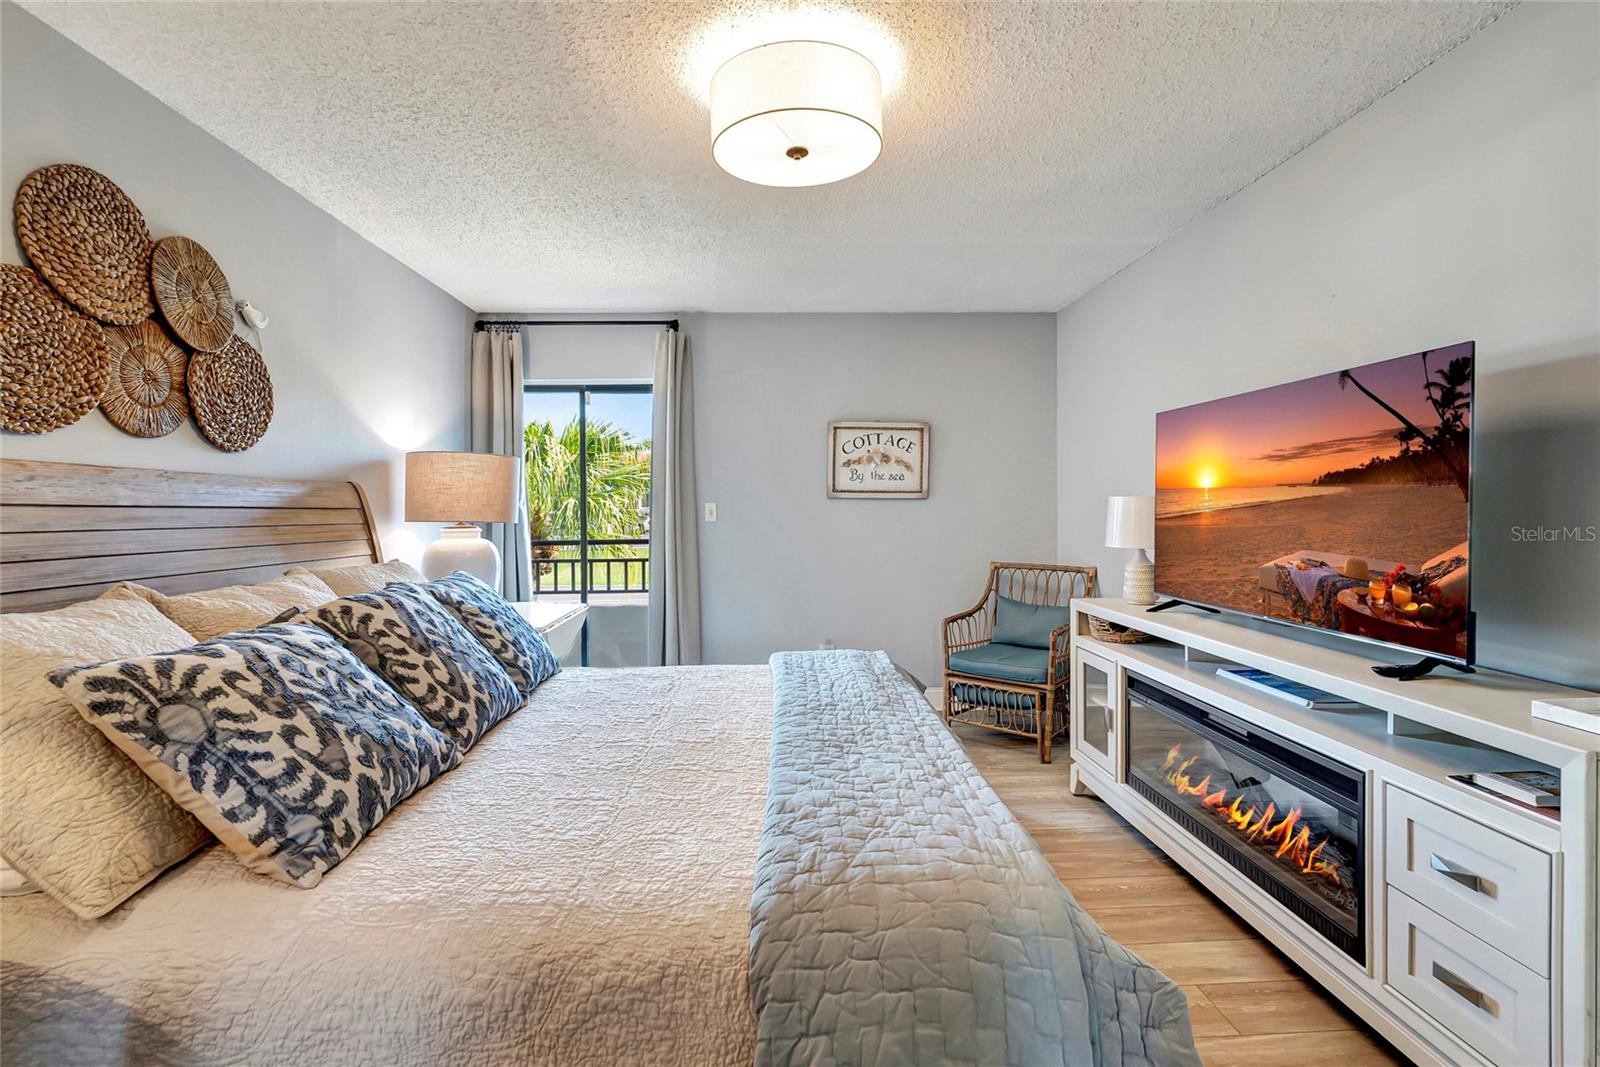 The primary bedroom is your sanctuary within our condo unit. Step inside and feel the stress of the day melt away as you're embraced by comfort and tranquility.